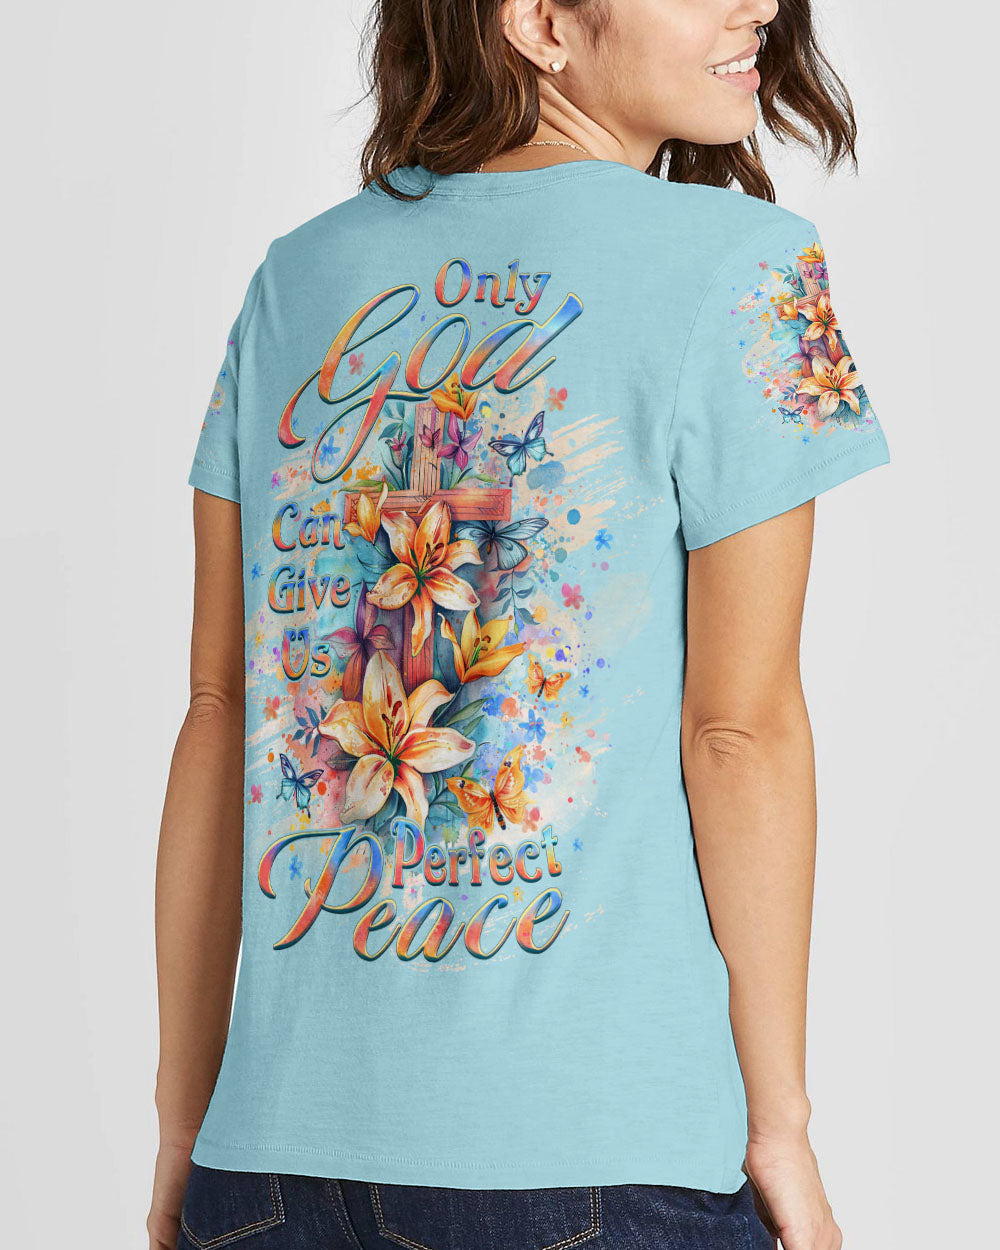 Only God Can Give Us Perfect Peace Women's All Over Print Shirt - Yhlt2602241